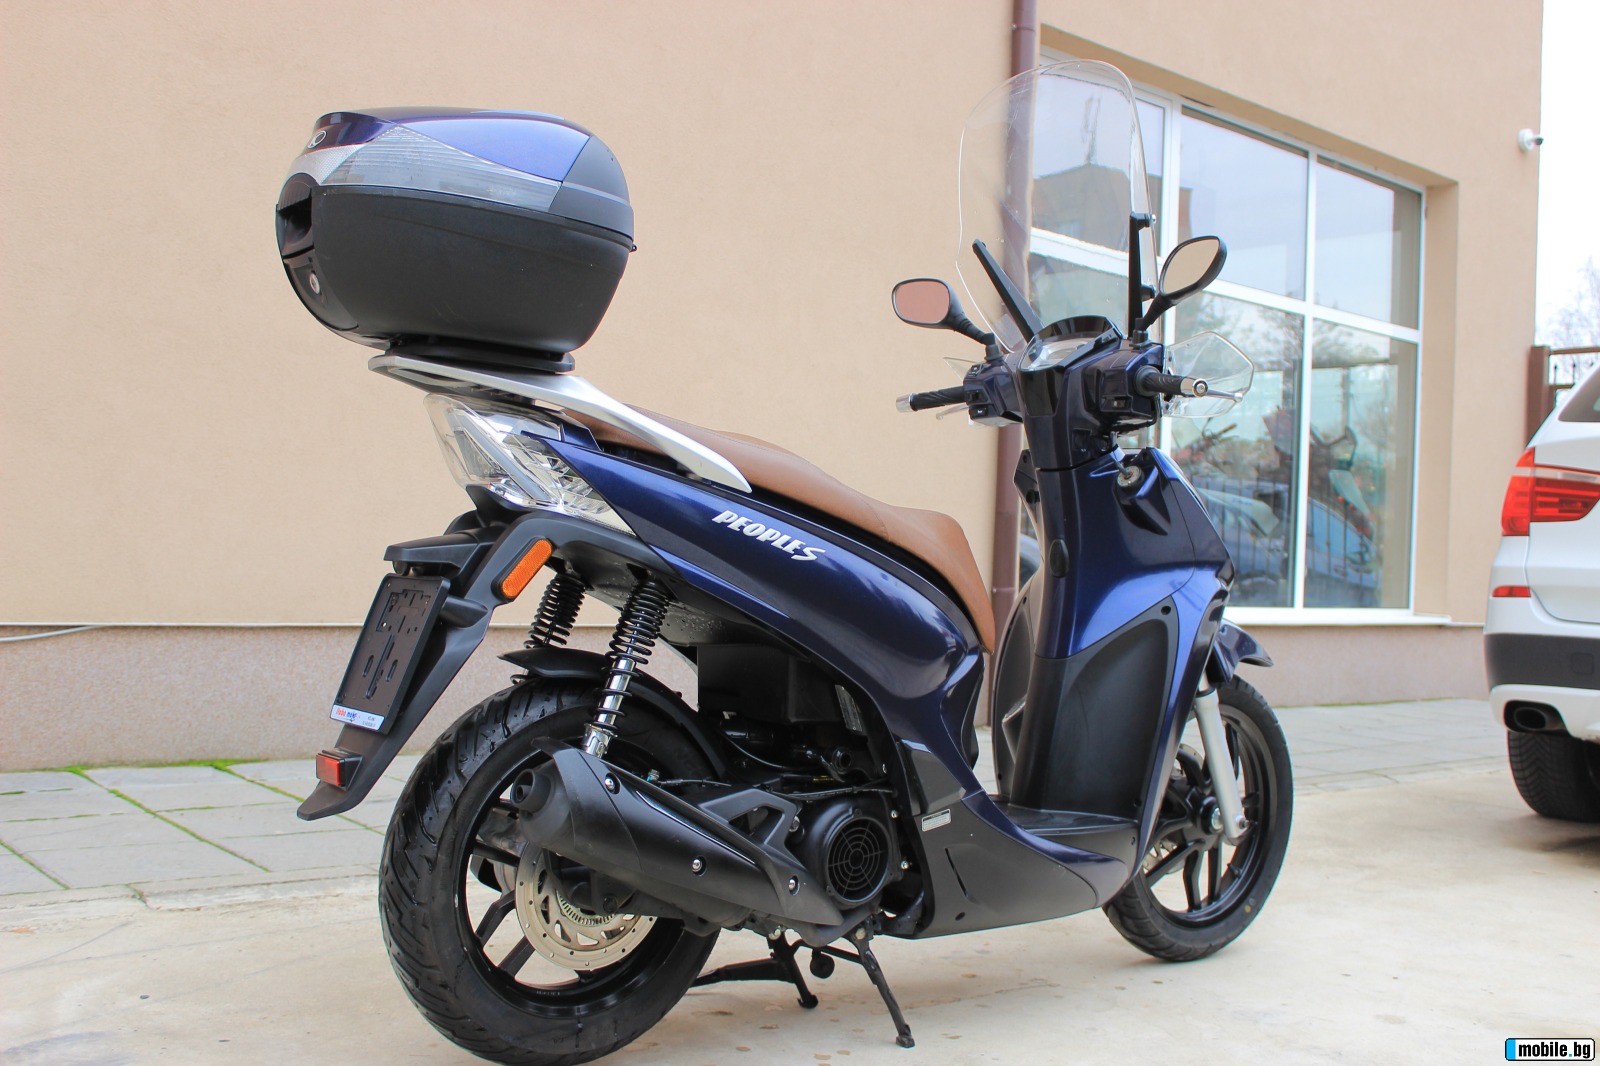 Kymco People New, 125ie, ABS, Led, 2018. | Mobile.bg   11